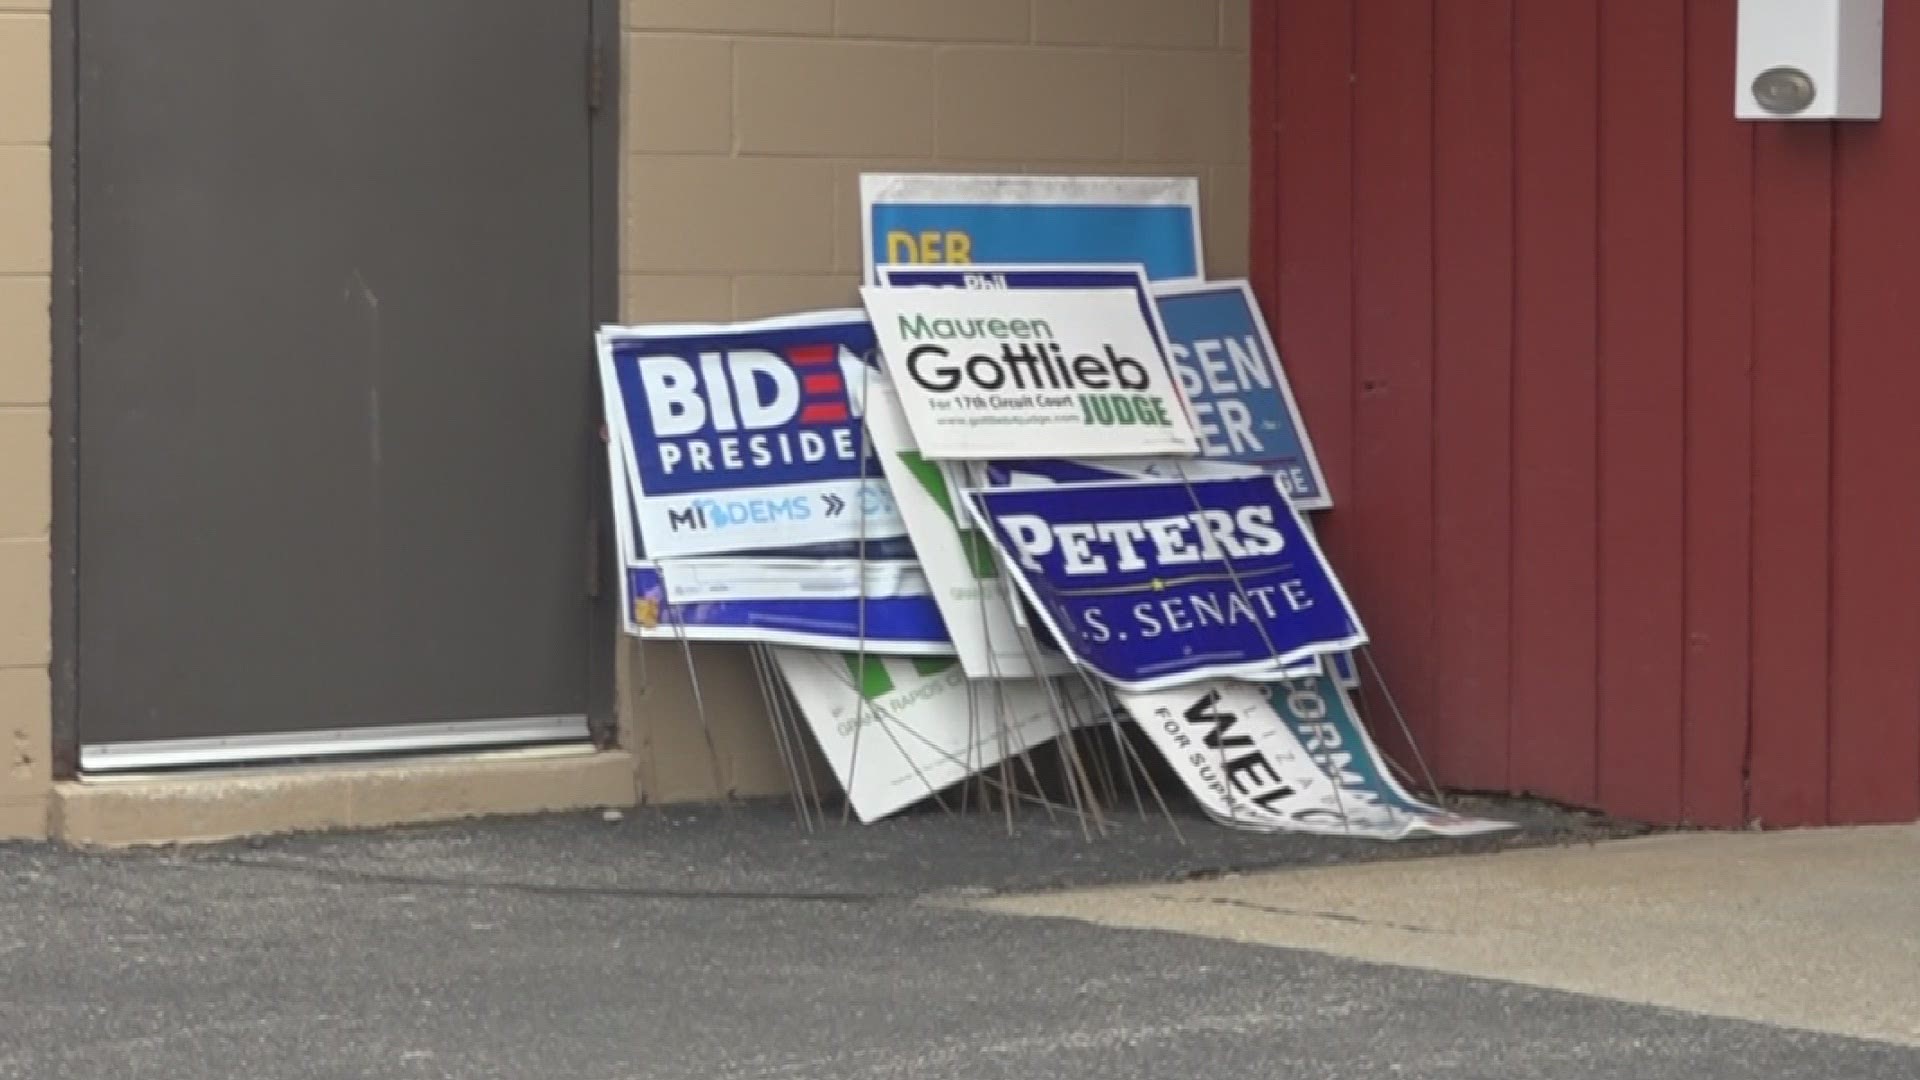 There are multiple options on how you can re-use or recycle your campaign sign.